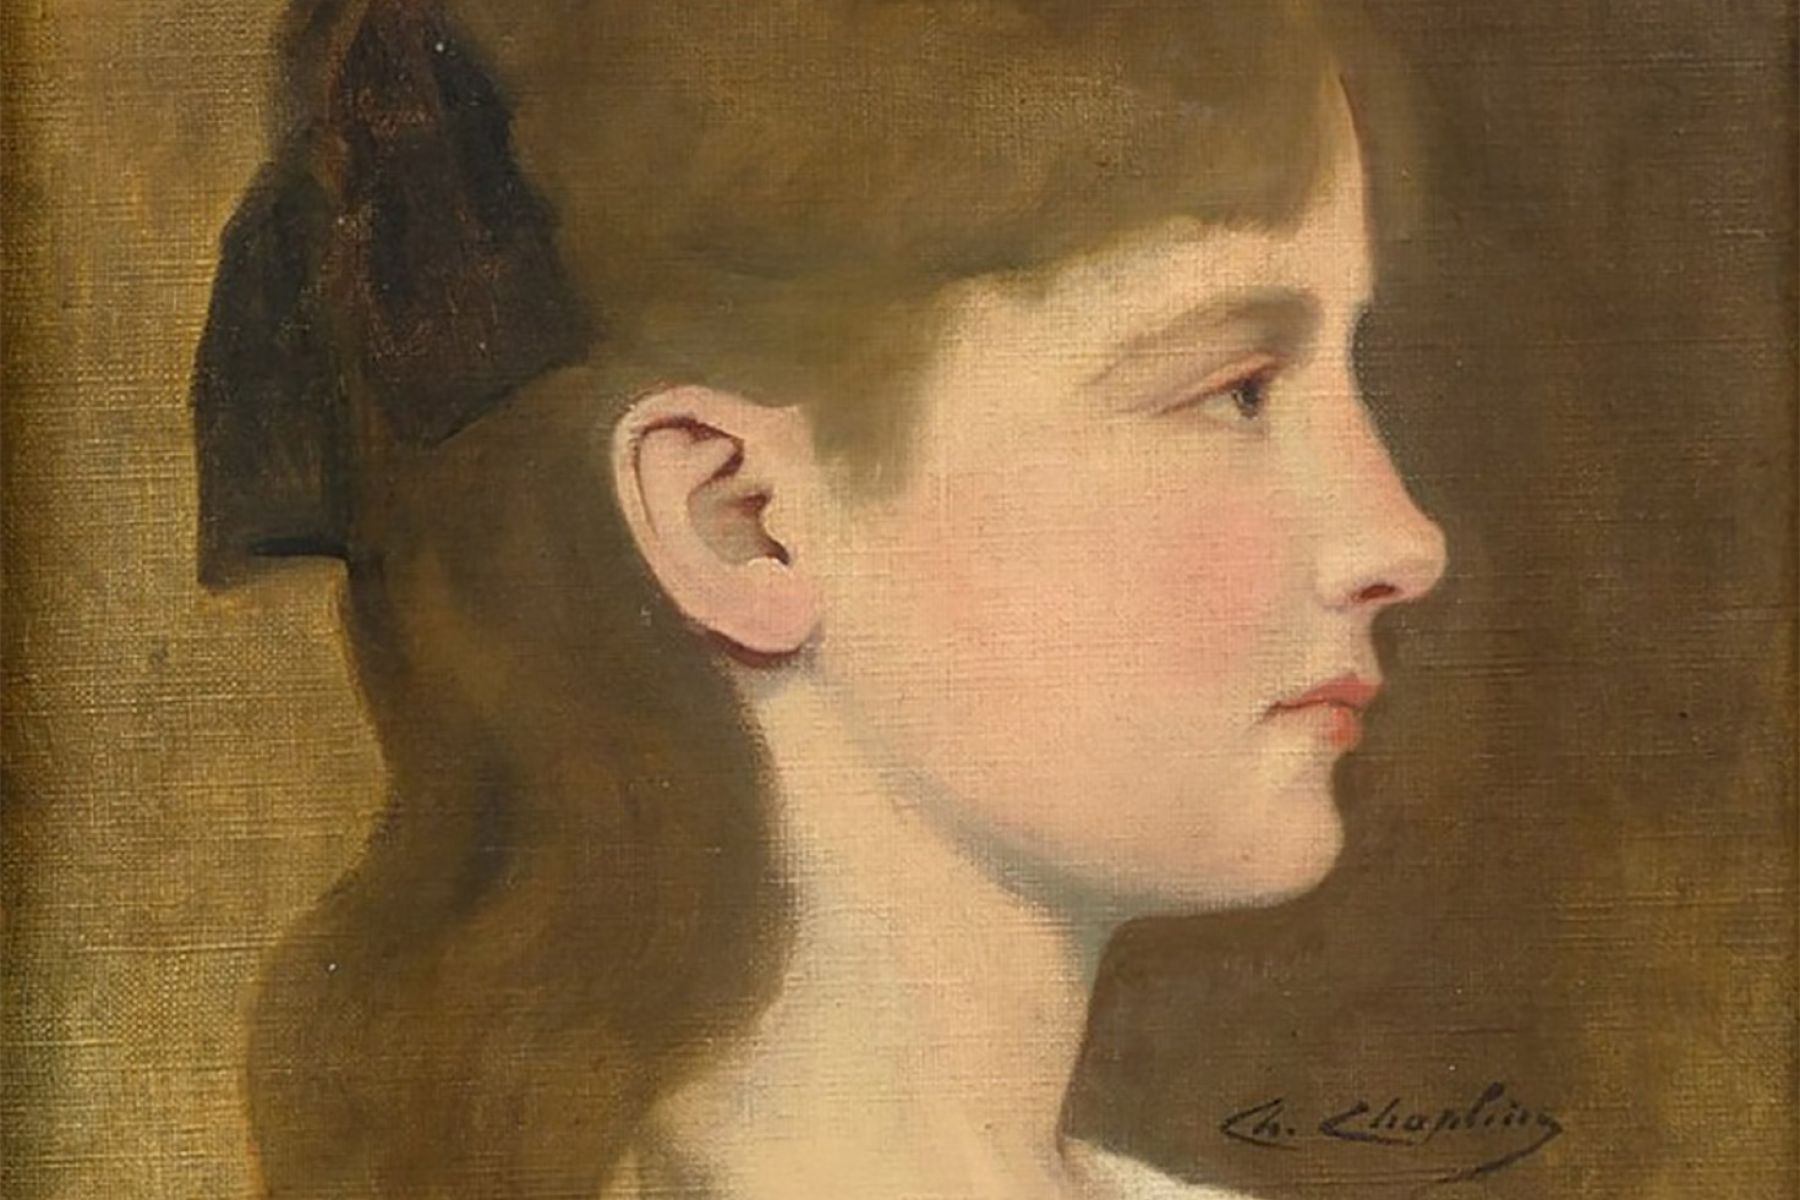 Charles Chaplin (1825-1891) - A young girl portrait